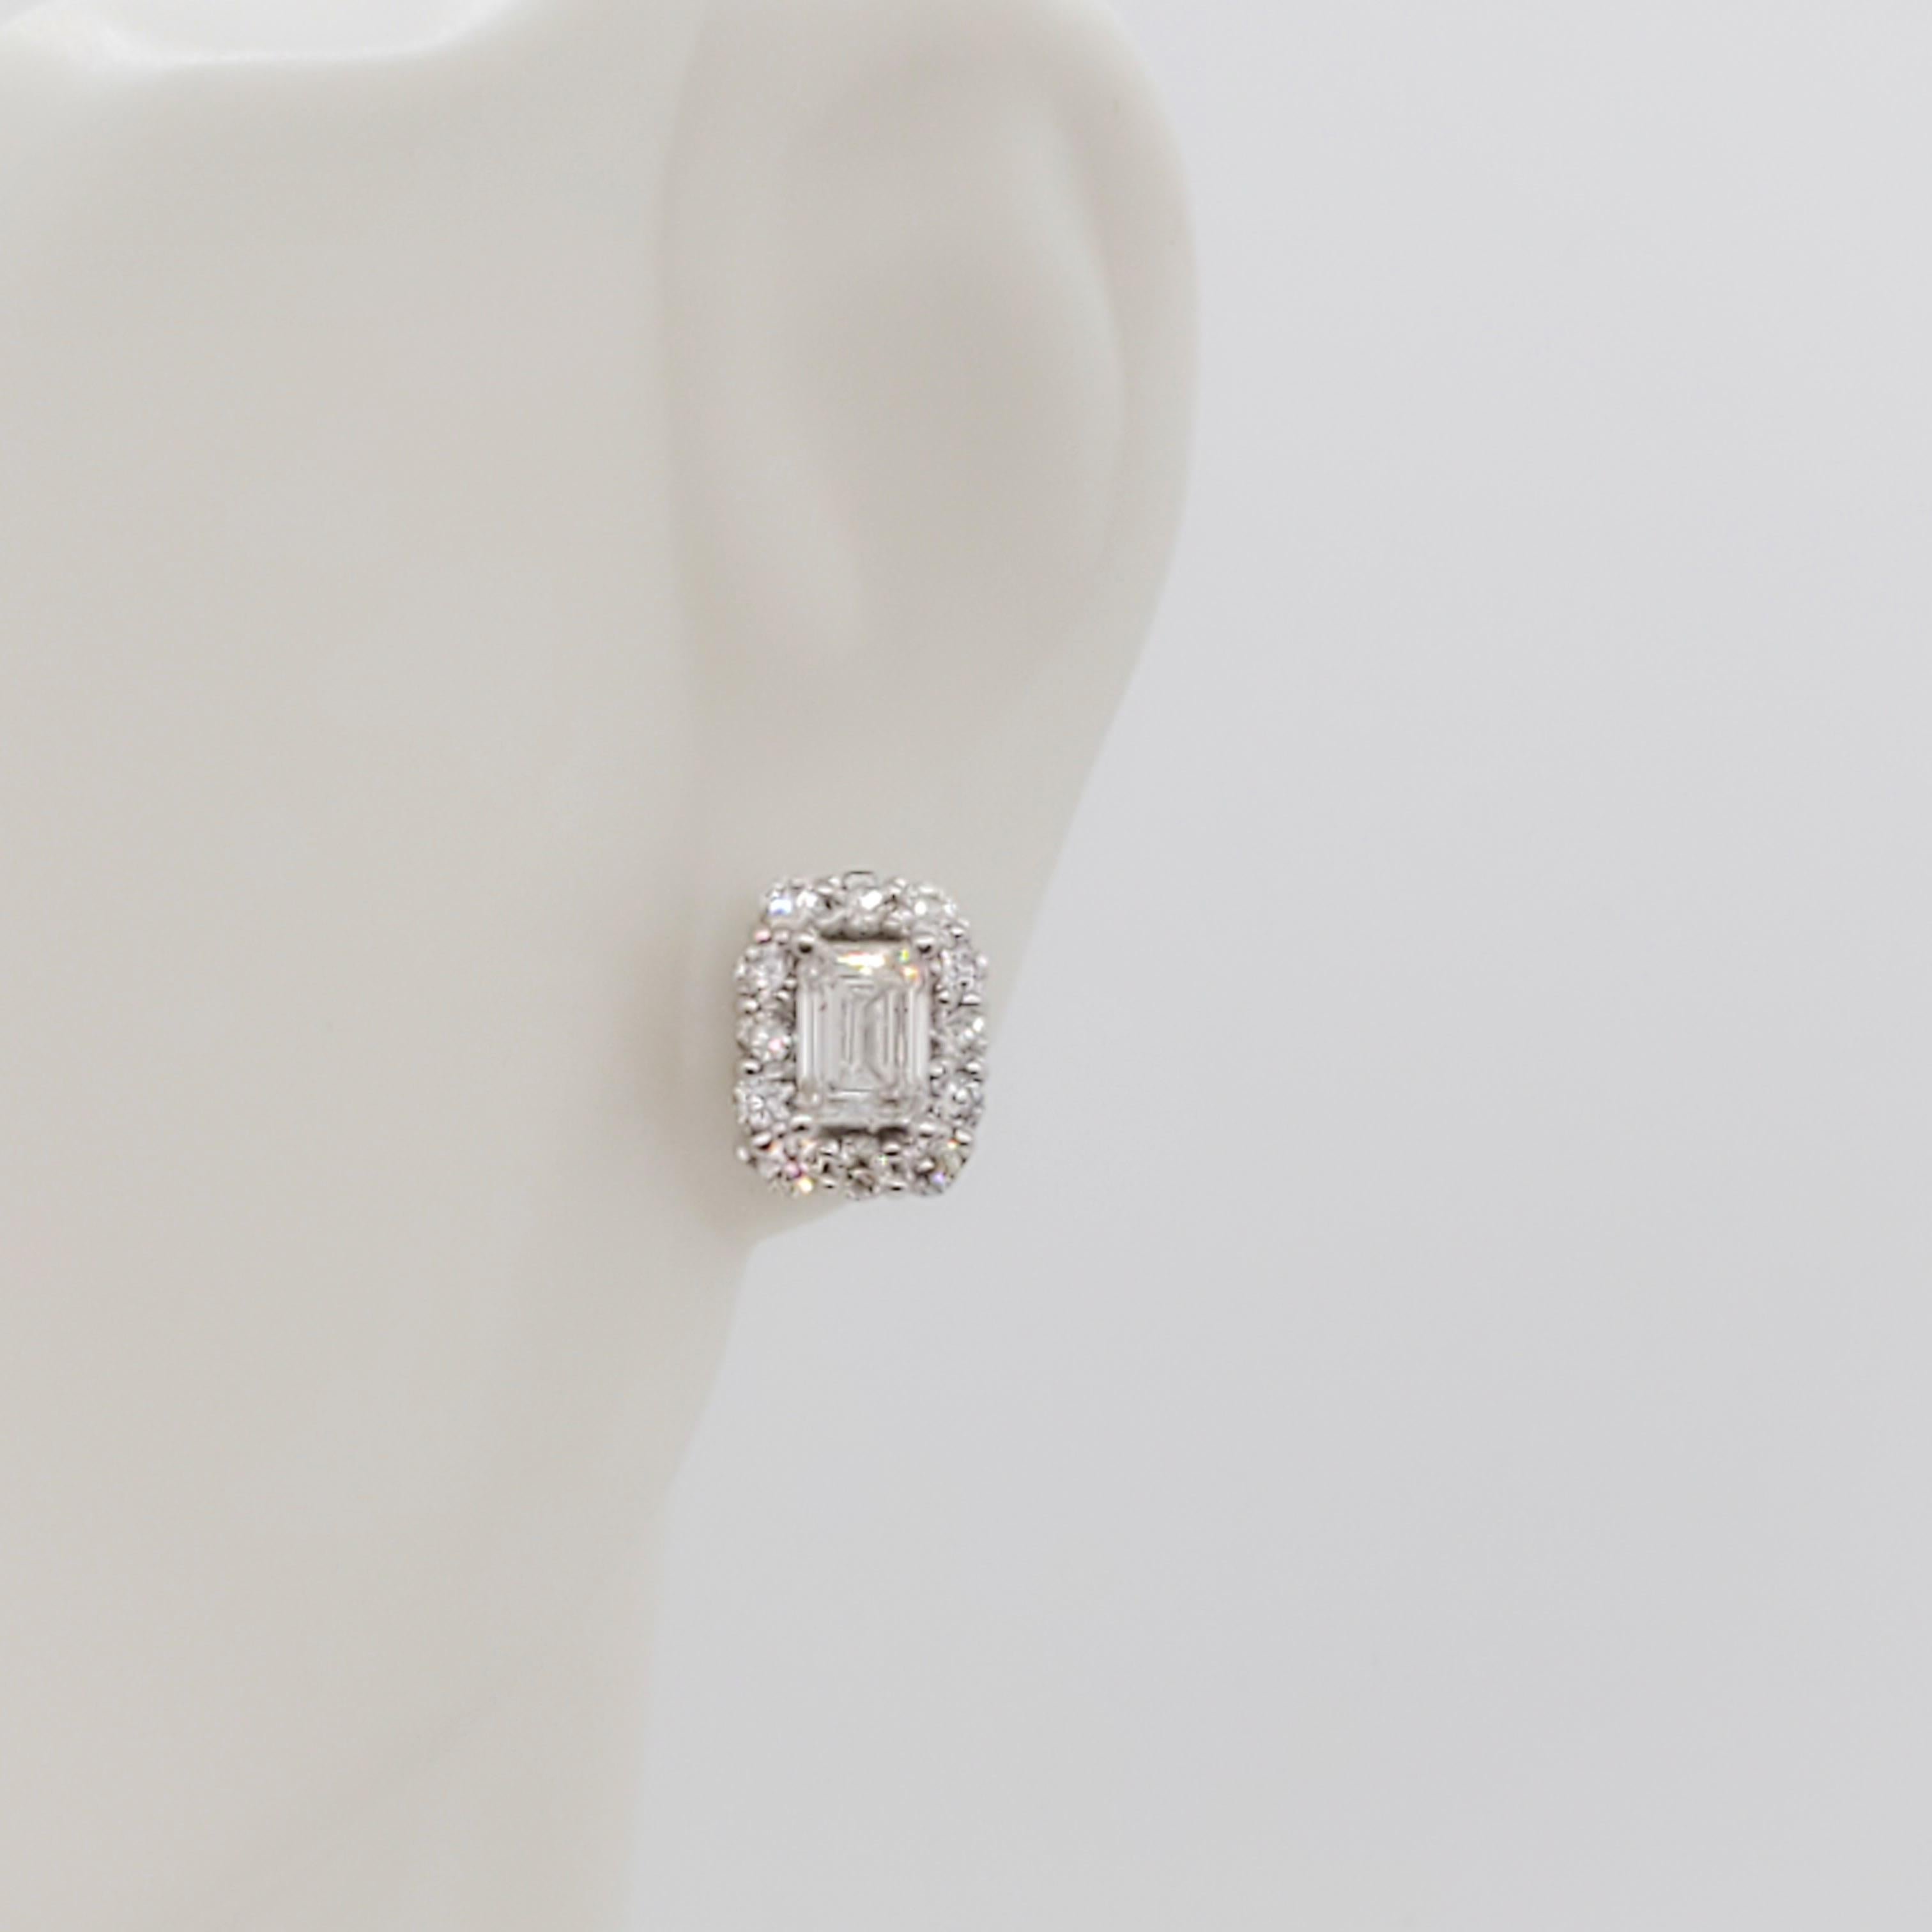 Gorgeous 0.38 ct. good quality, white, and bright emerald cut diamonds with 1.20 ct. good quality white diamond rounds. Handmade 14k white gold mounting.